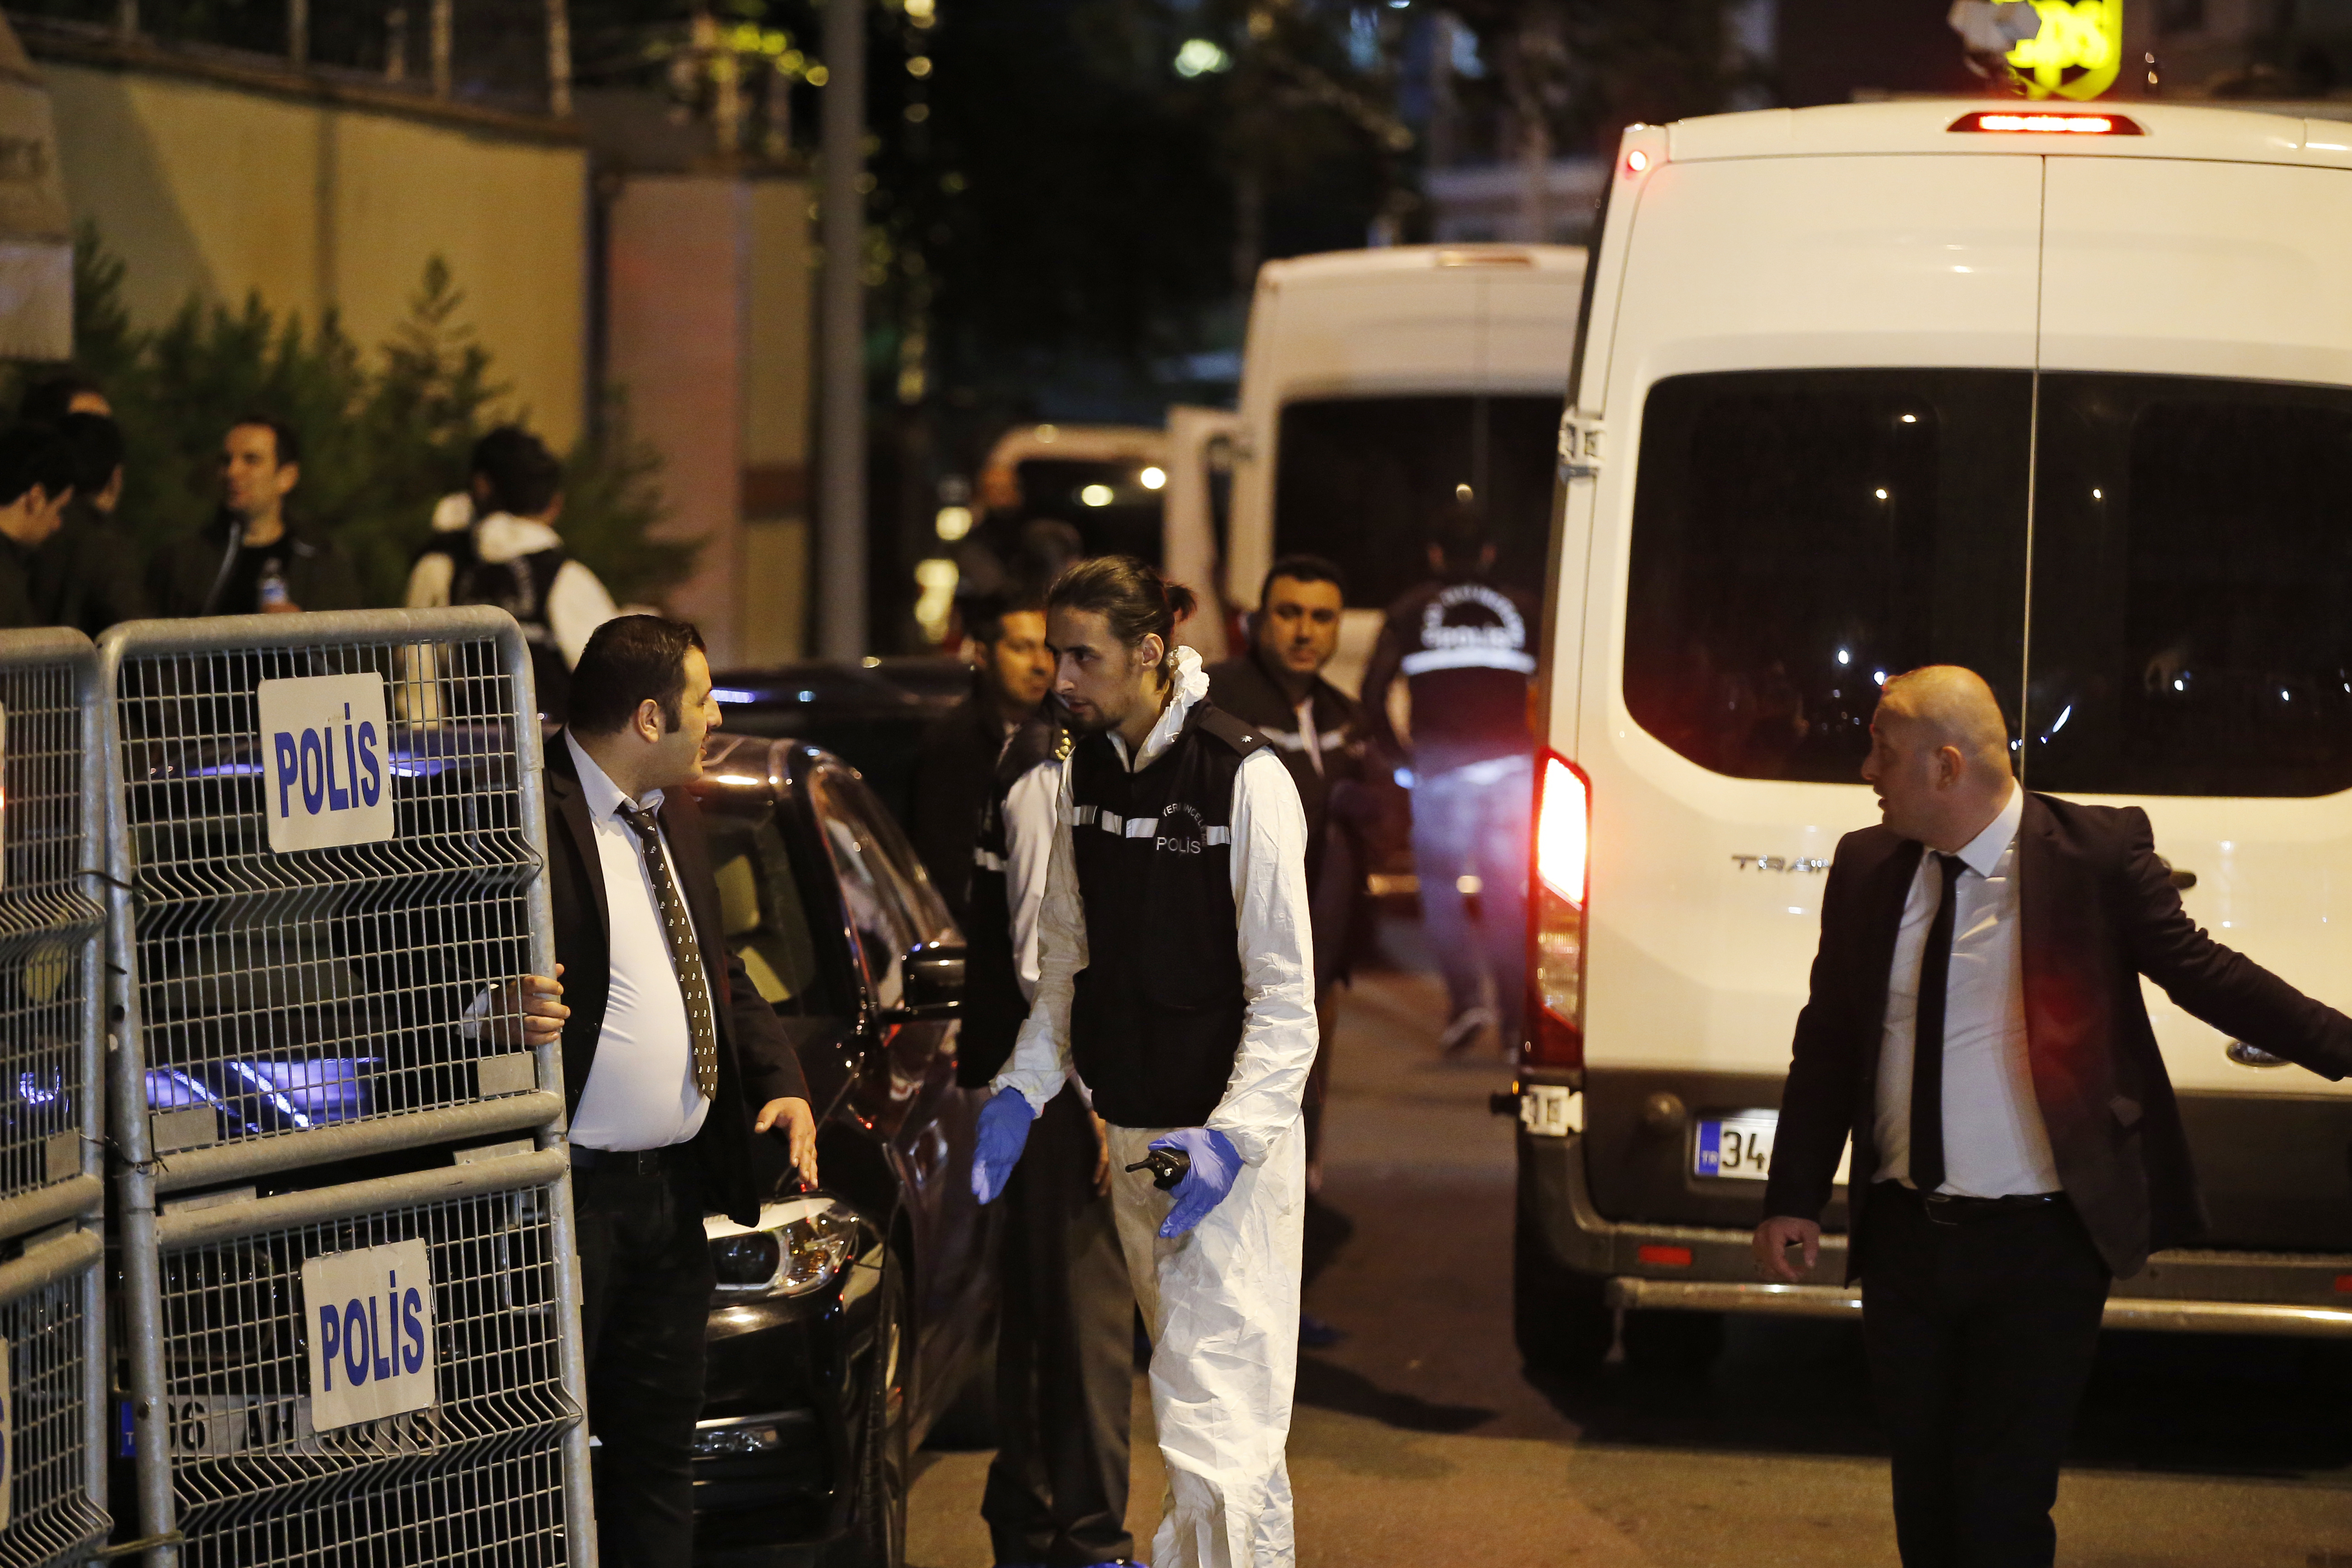 Turkish police officers arrive at the Saudi Arabia consulate